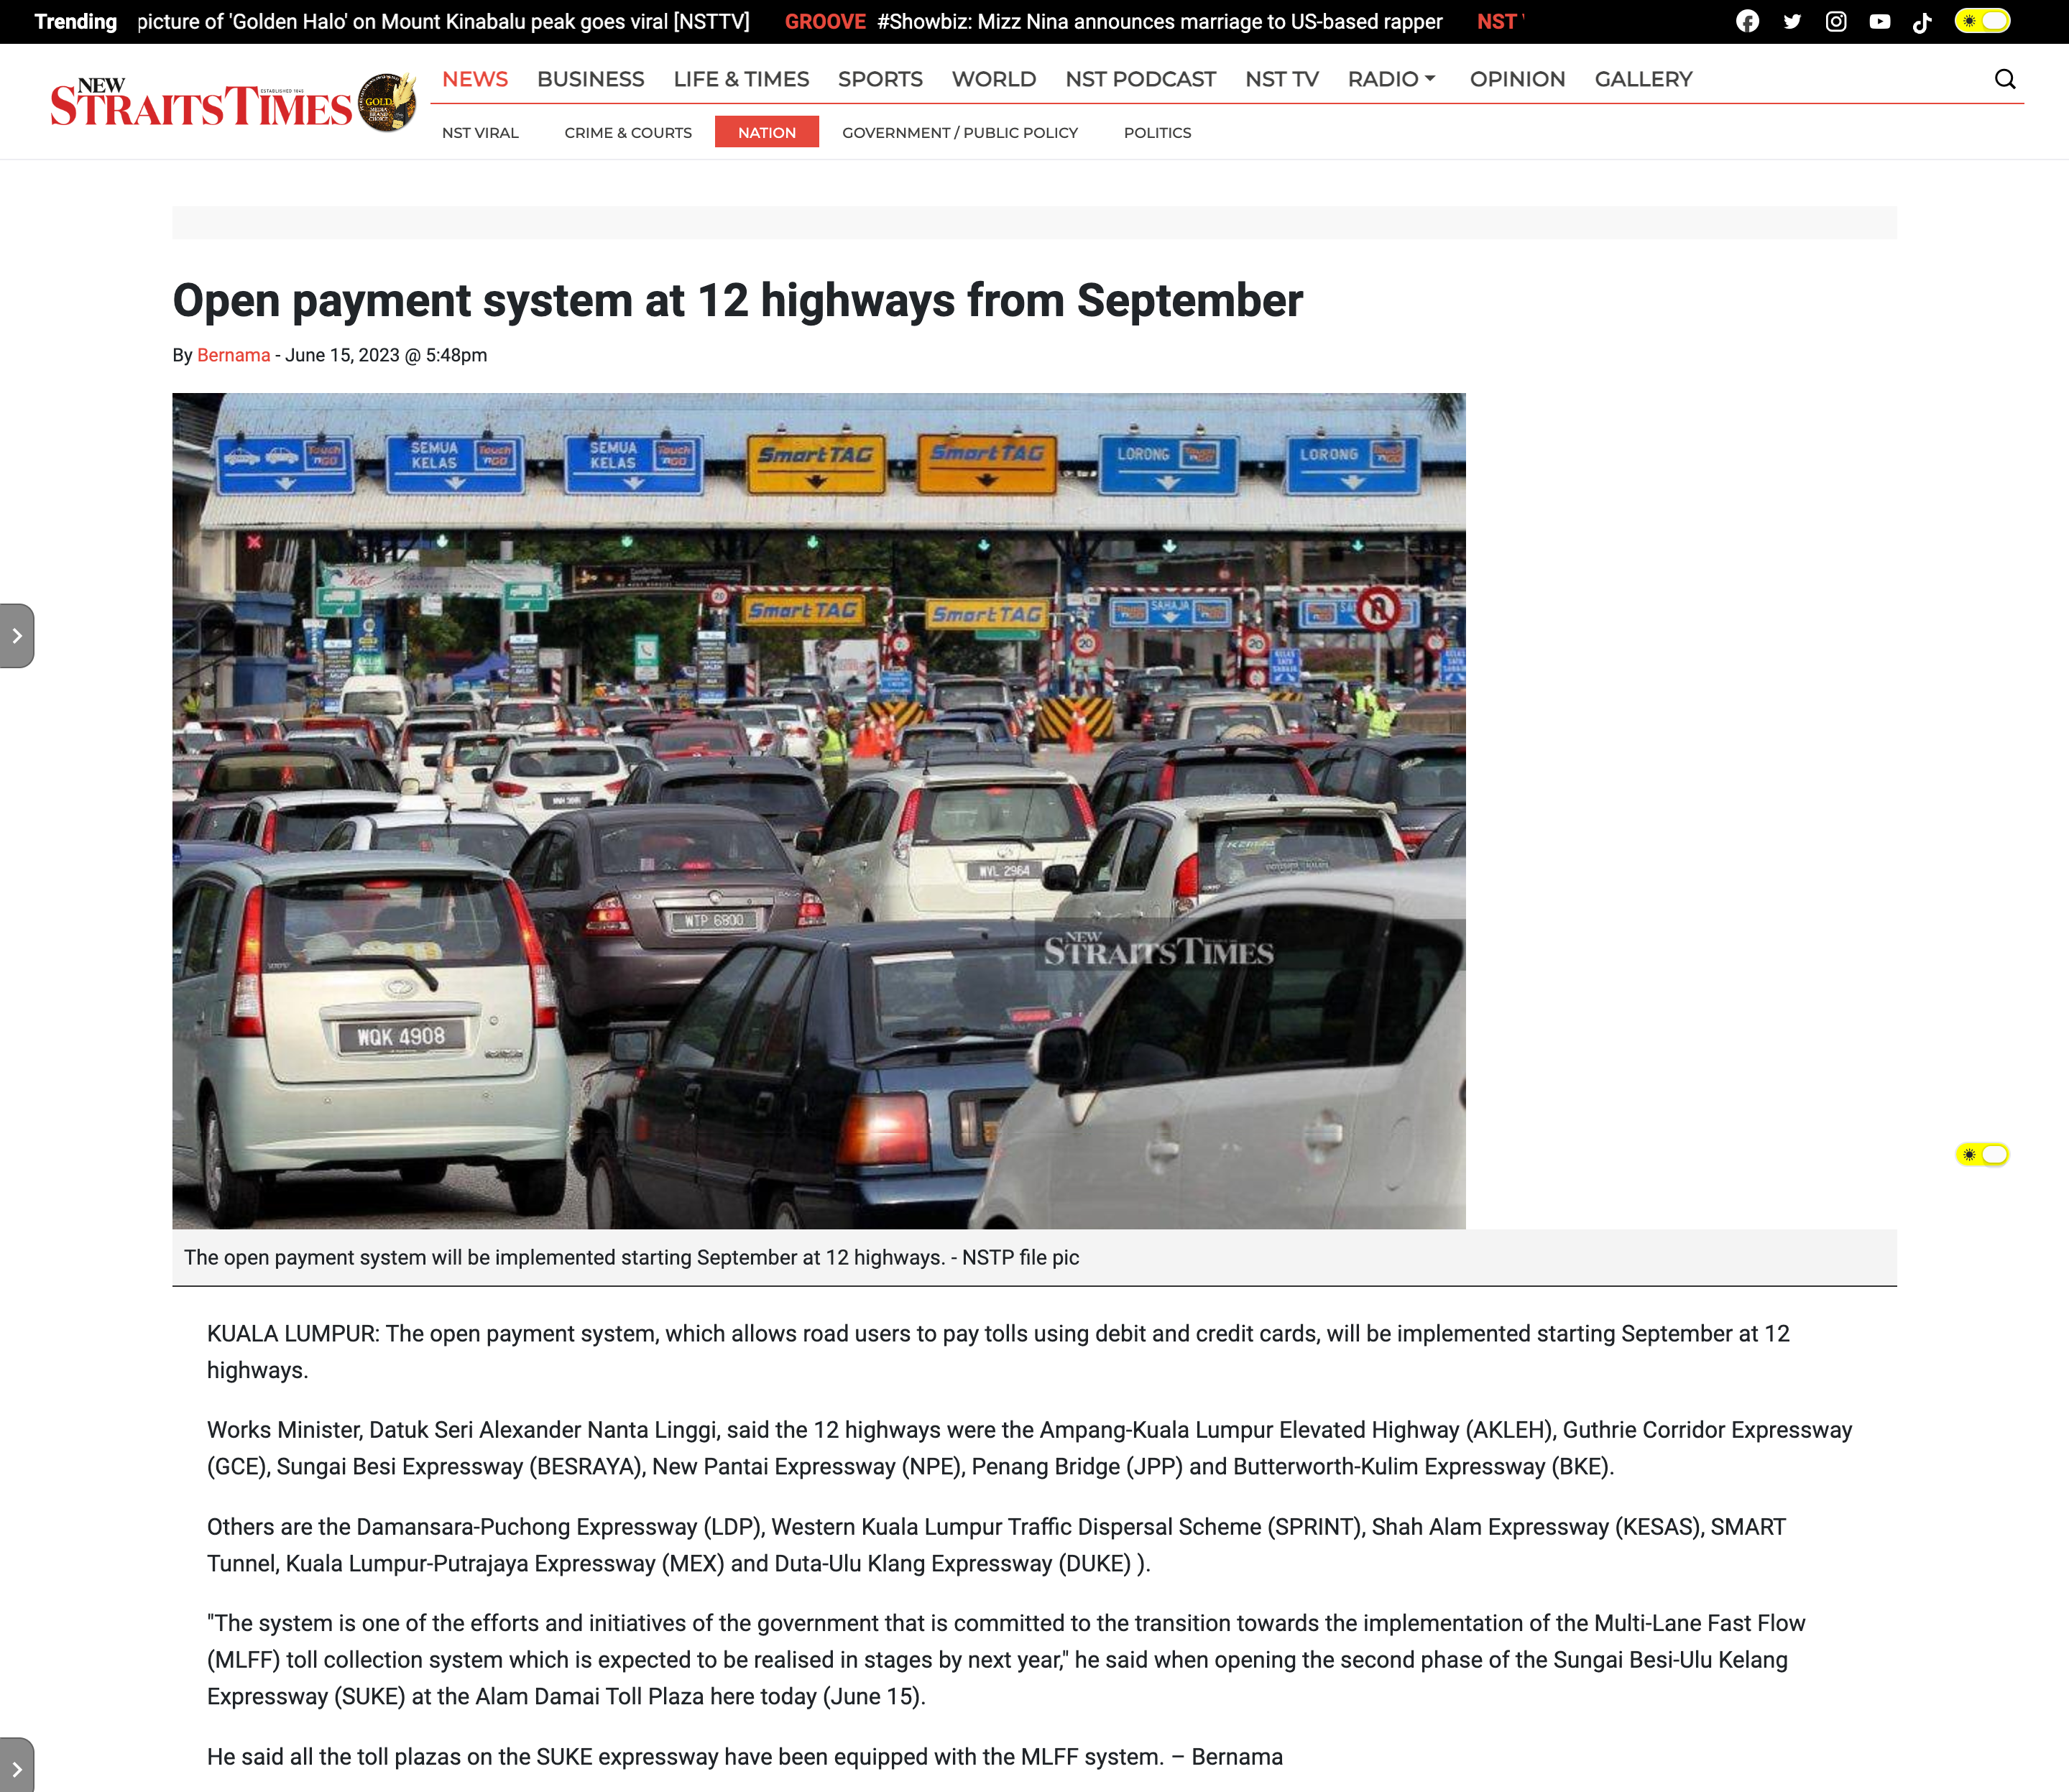 NEW STRAITS TIMES | OPEN PAYMENT SYSTEM AT 12 HIGHWAYS FROM SEPTEMBER